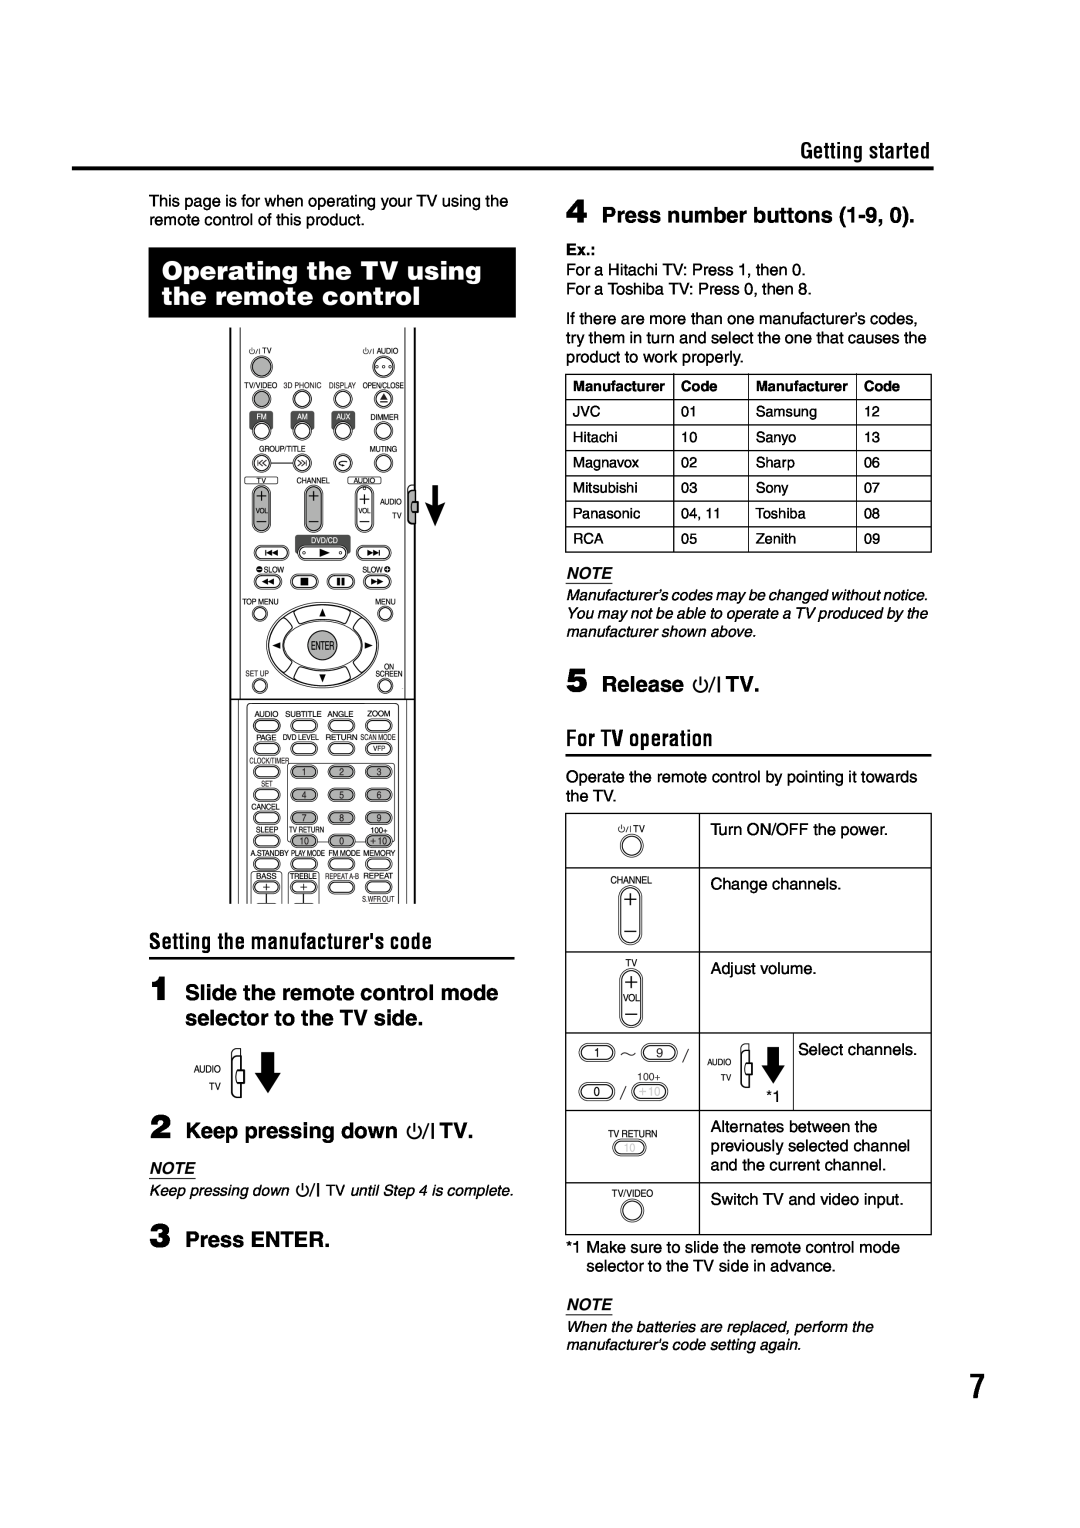 JVC GVT0142-001A manual Operating the TV using the remote control, Setting the manufacturers code, Keep pressing down TV 